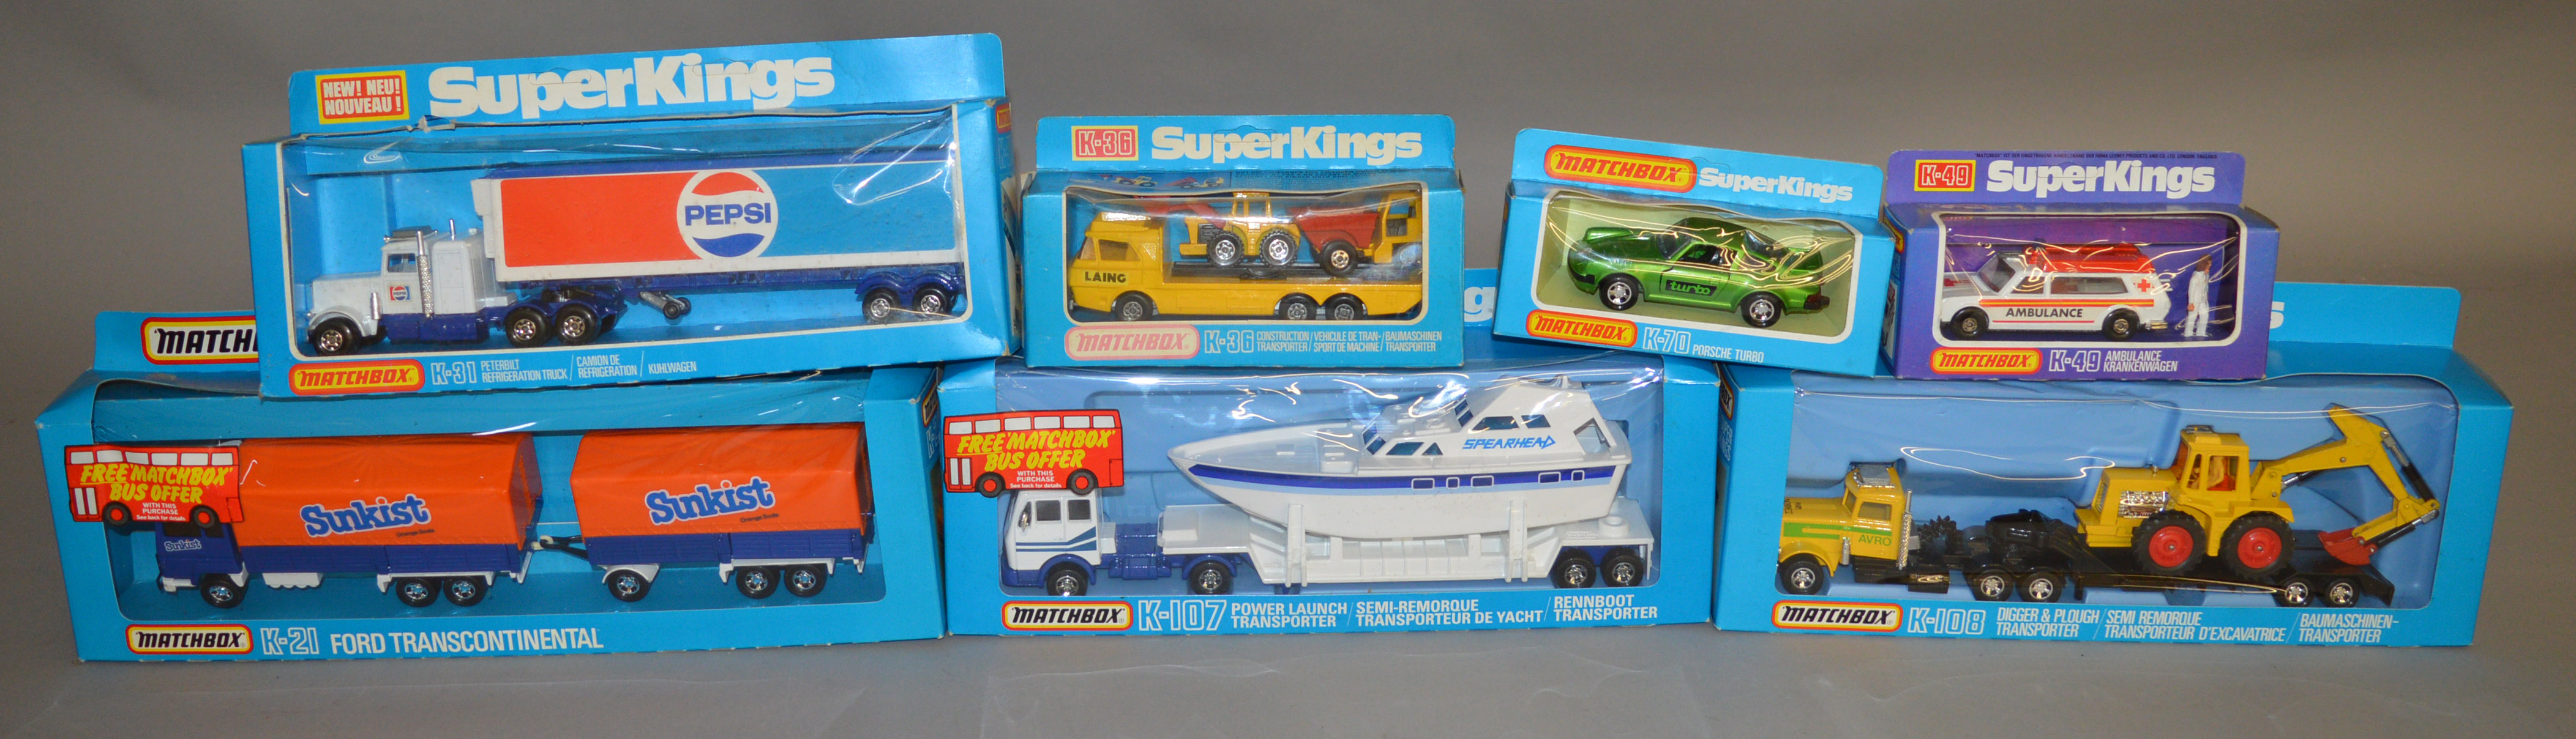 7 Matchbox models from the 'SuperKings' range, all in window box packaging, including K-36